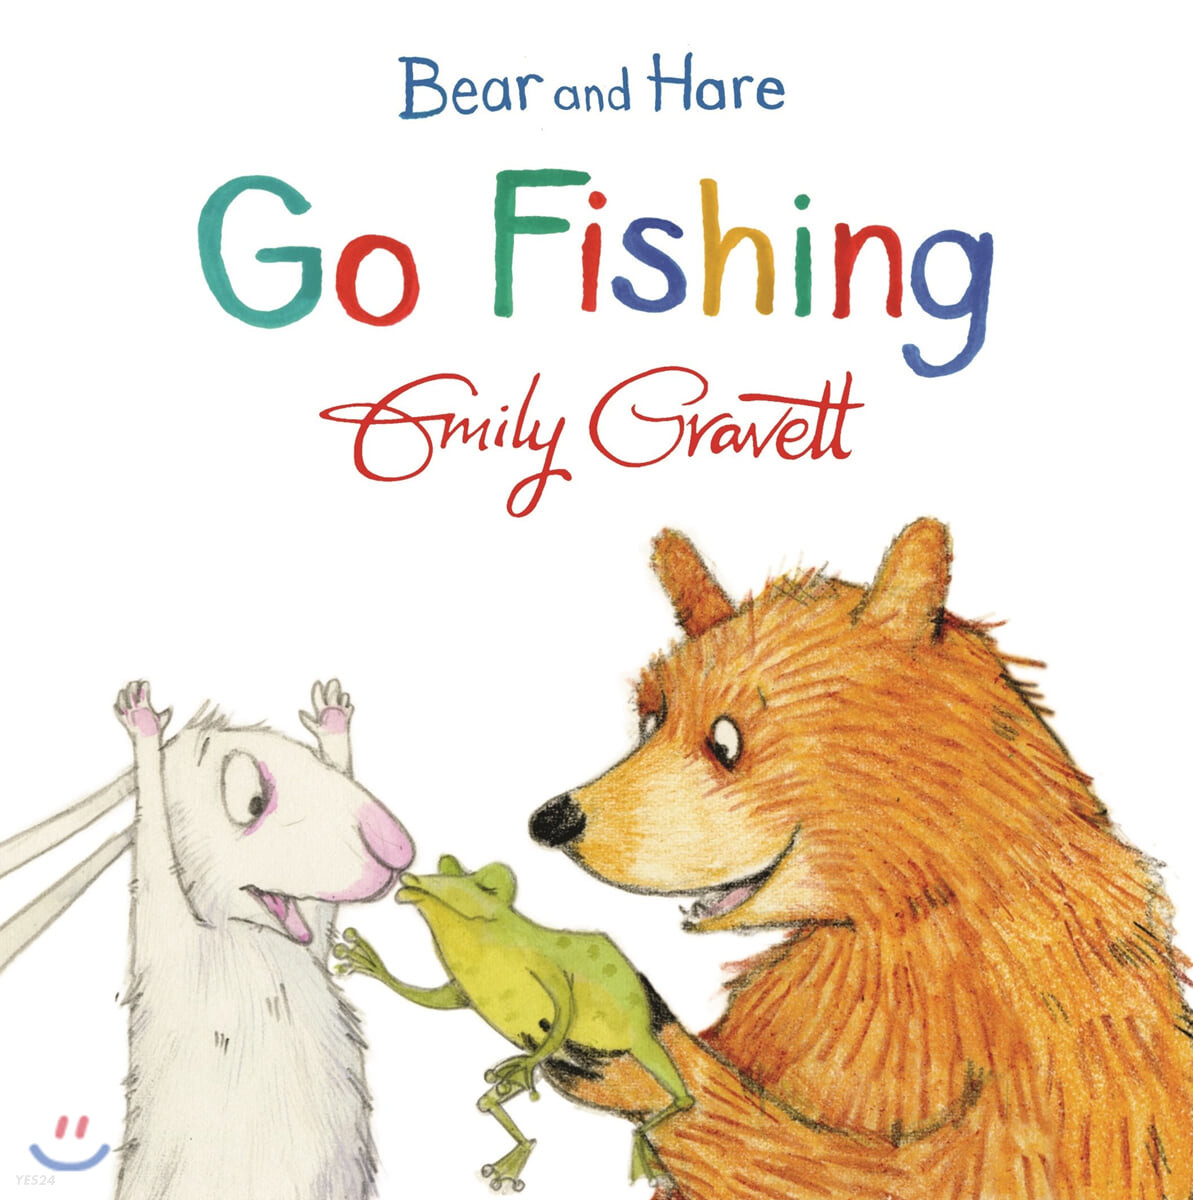 Bear and Hare. [4], Go fishing